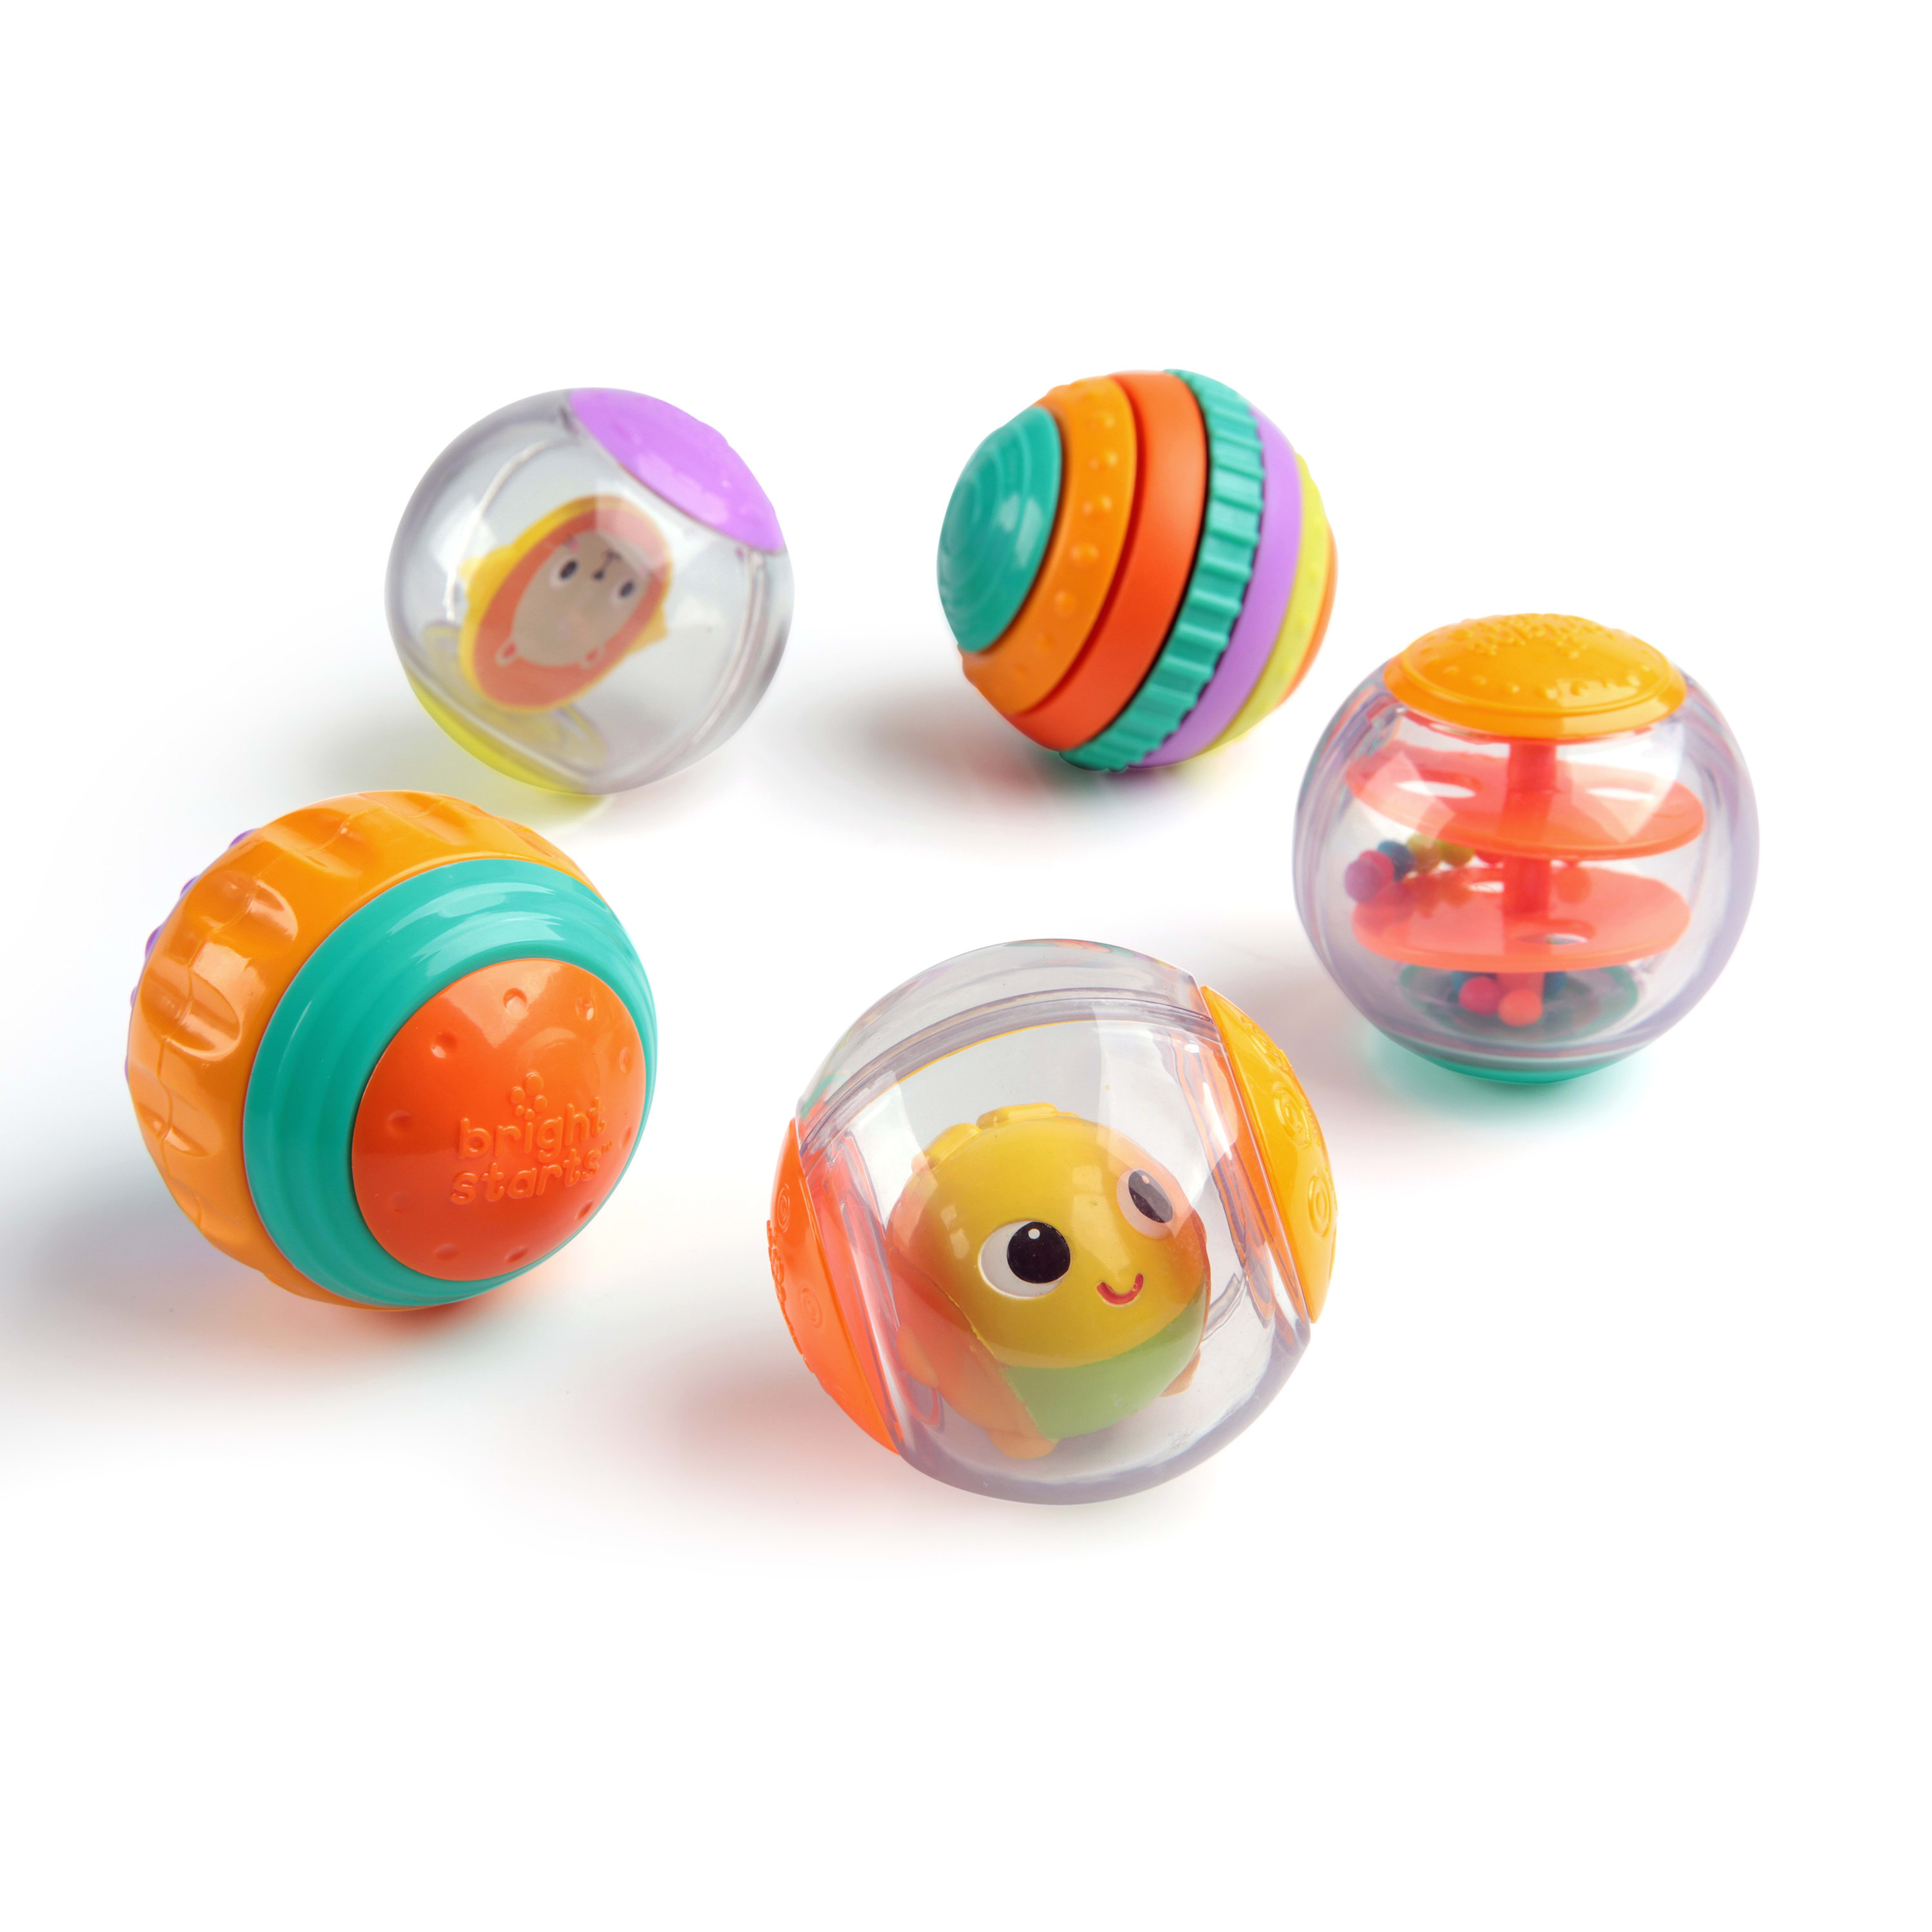 Bright Starts Shake & Spin Activity Balls Toy and Baby Rattle, Age 6 months + - image 1 of 7